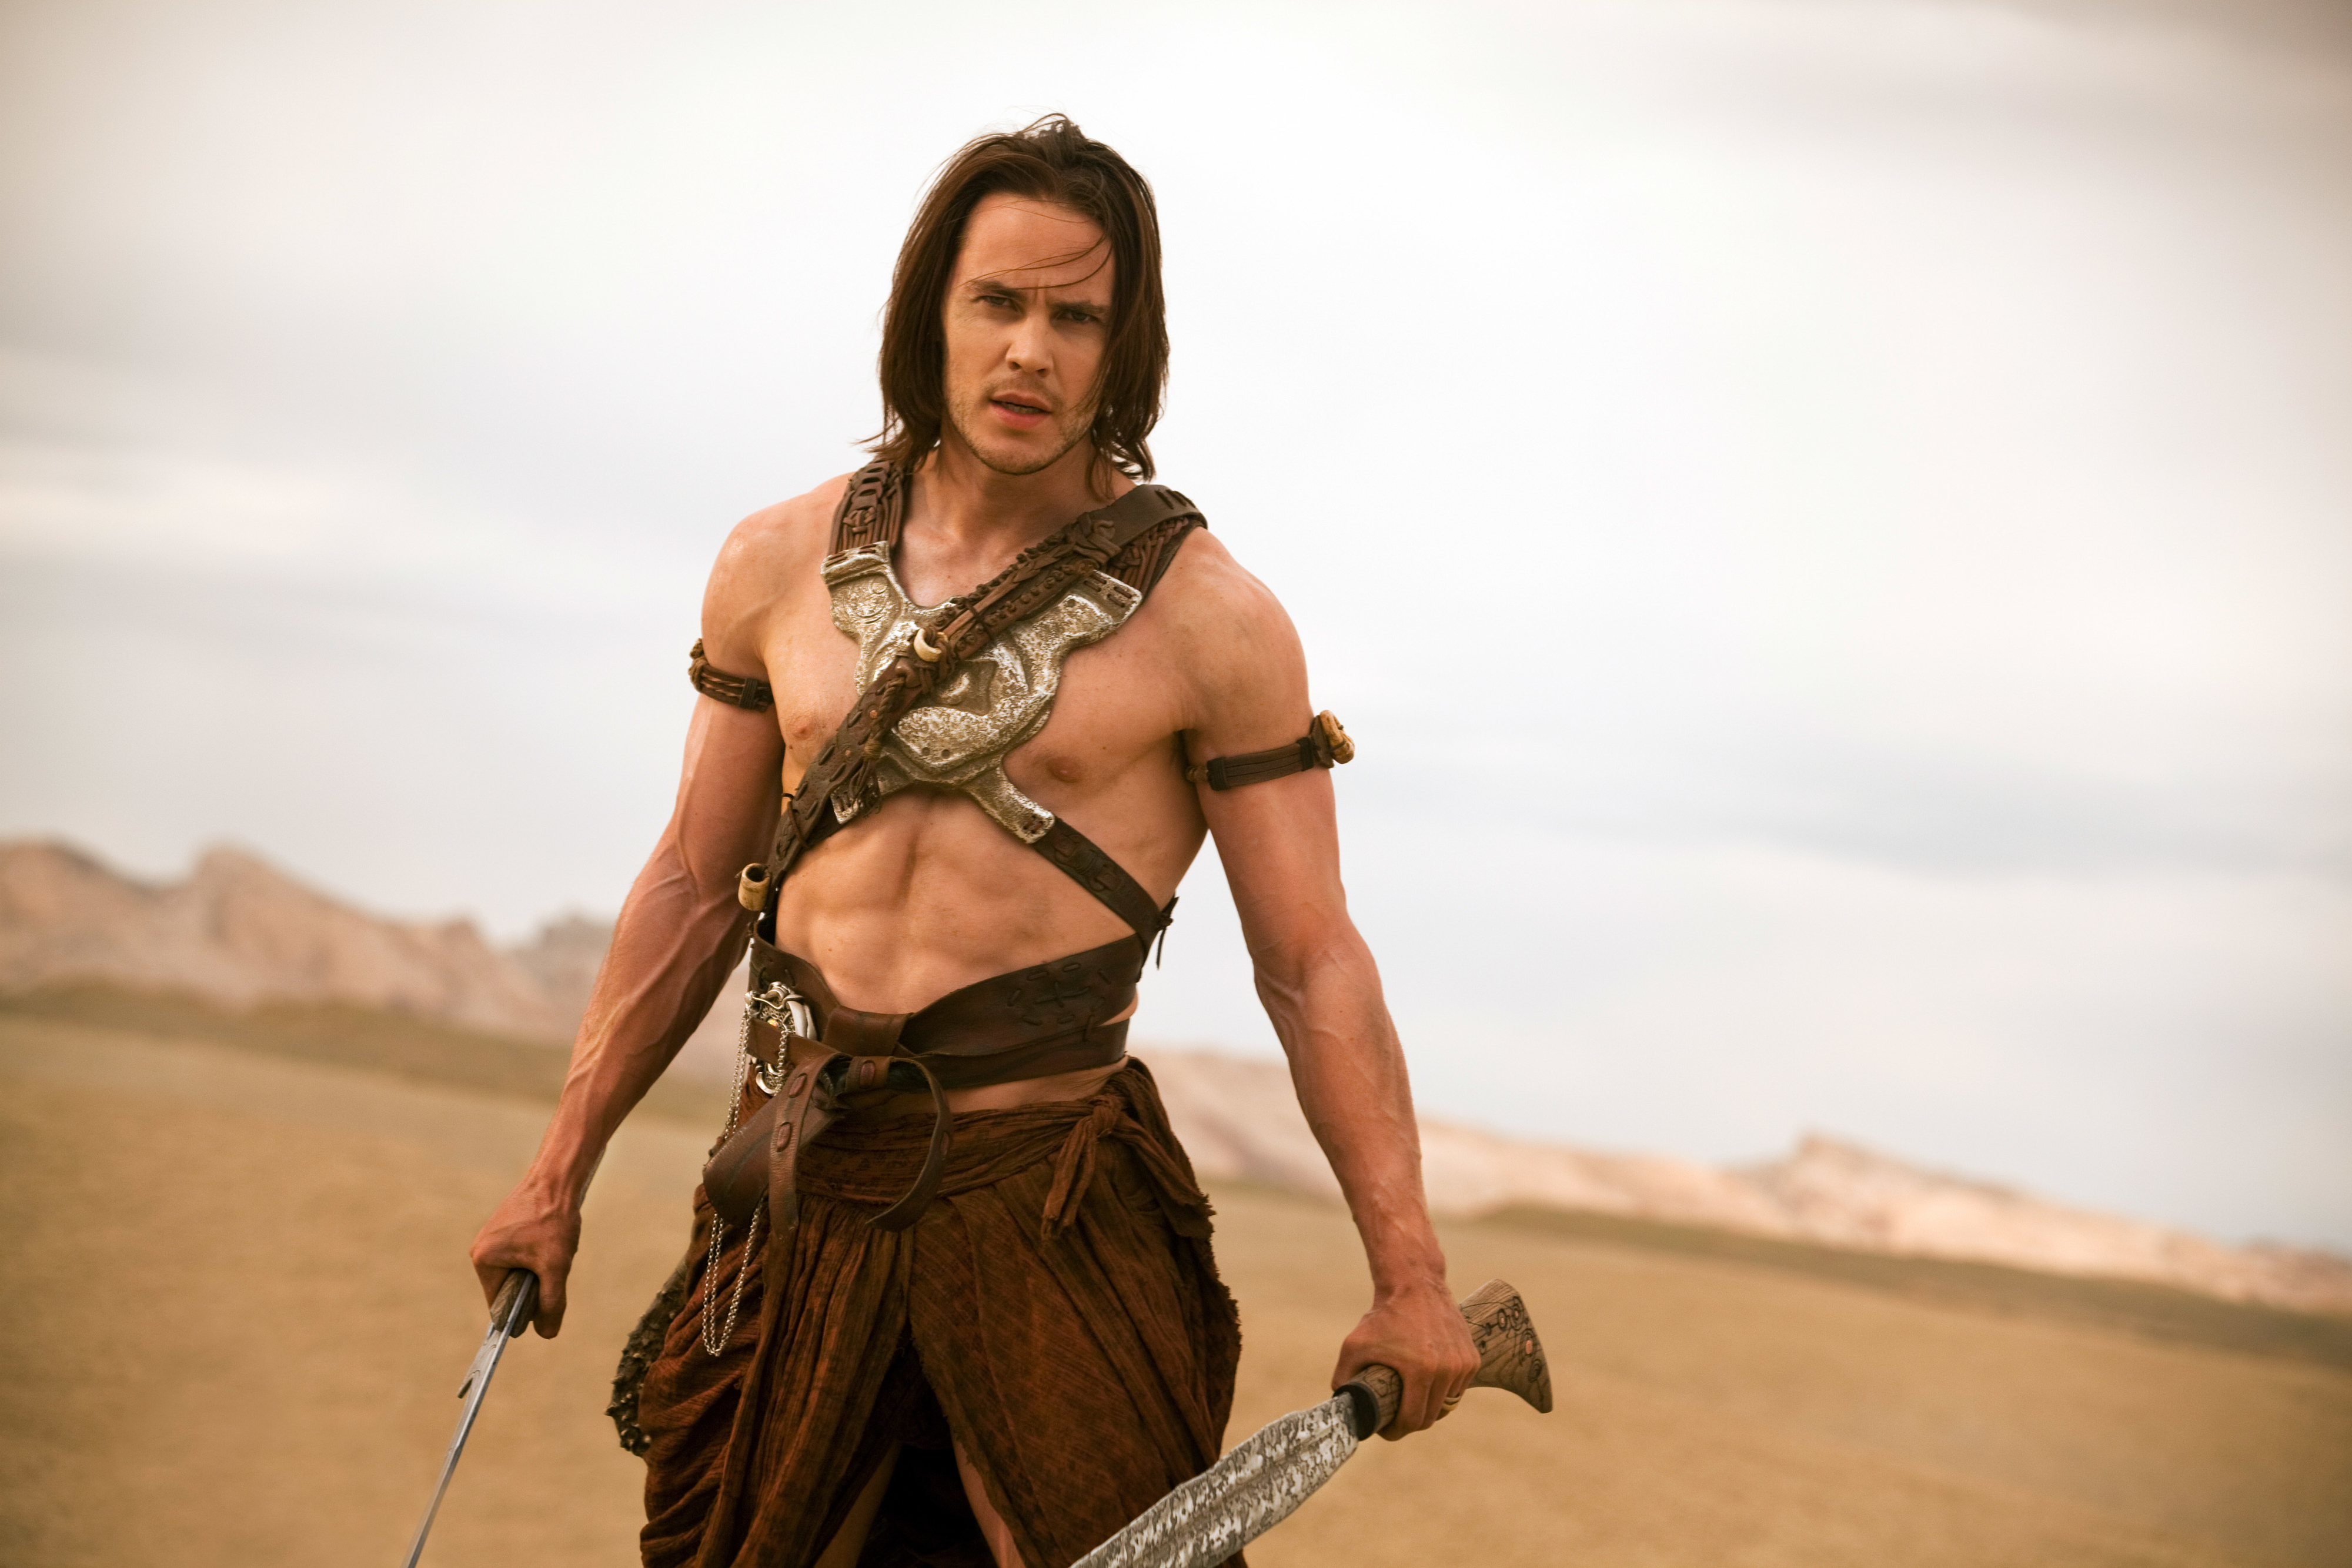 him dressed in warrior gear with no shirt and holding swords